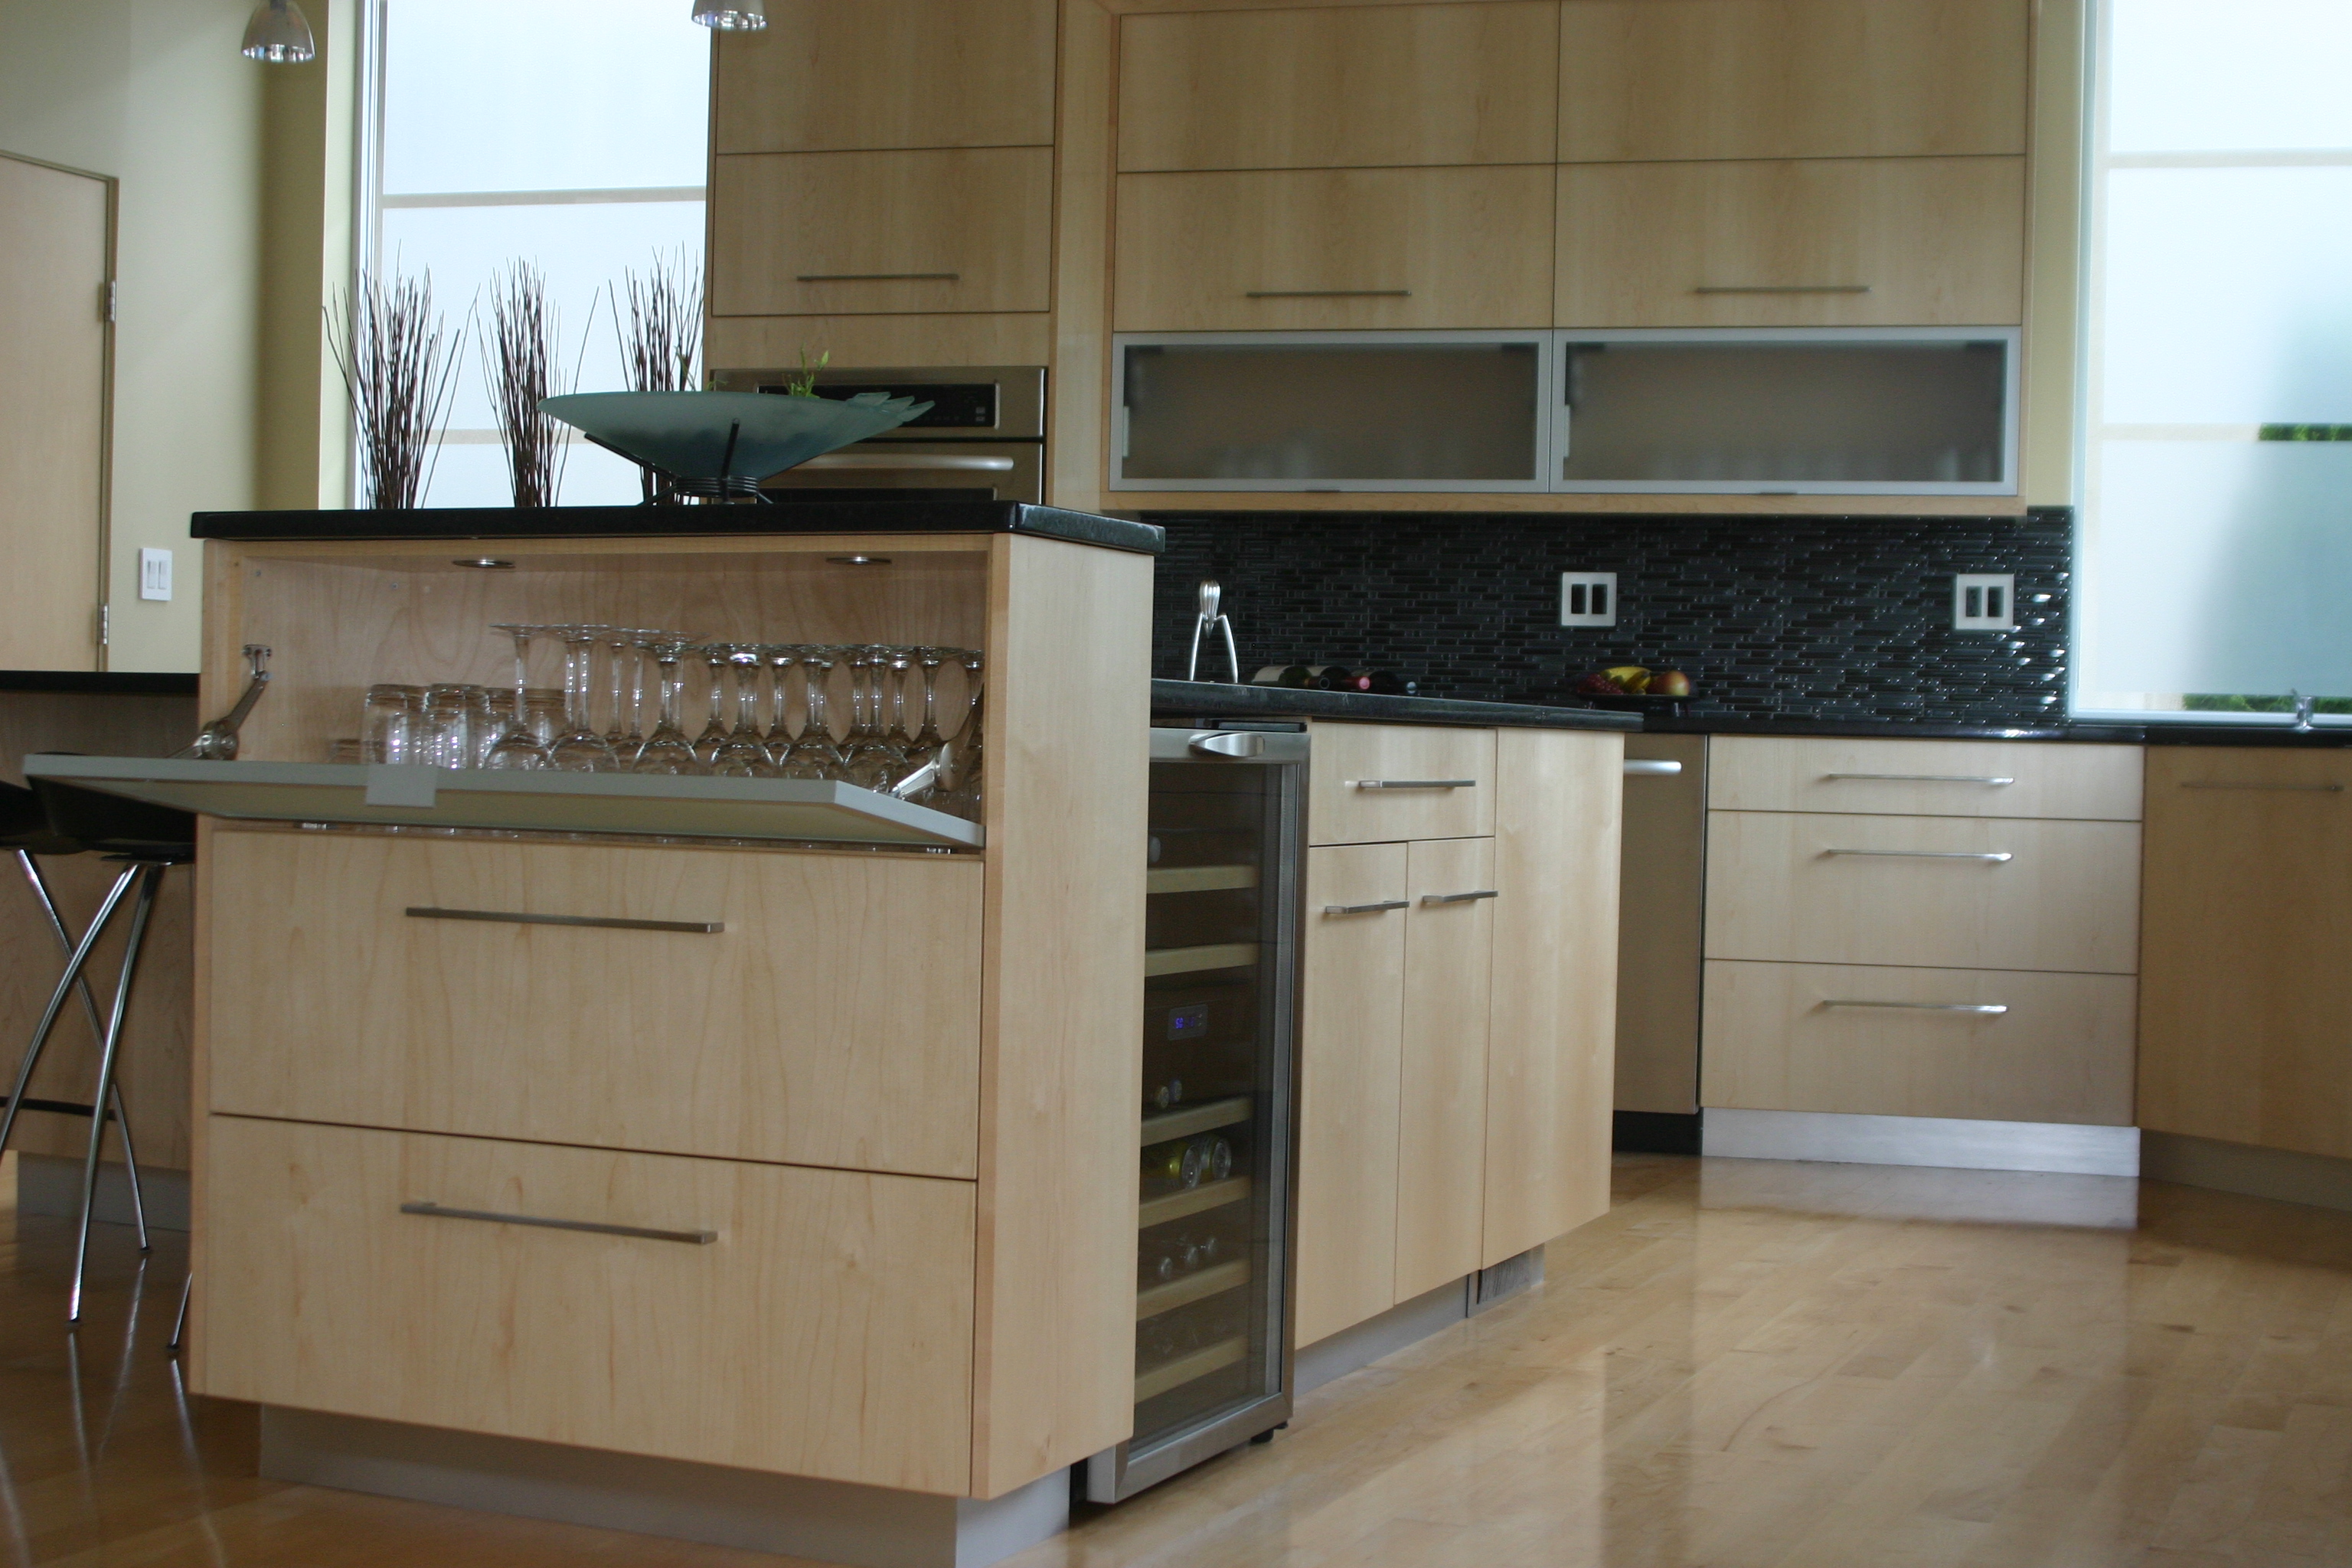 New Aventos Lift System and Display Cabinetry in Eastern Maple Kitchen